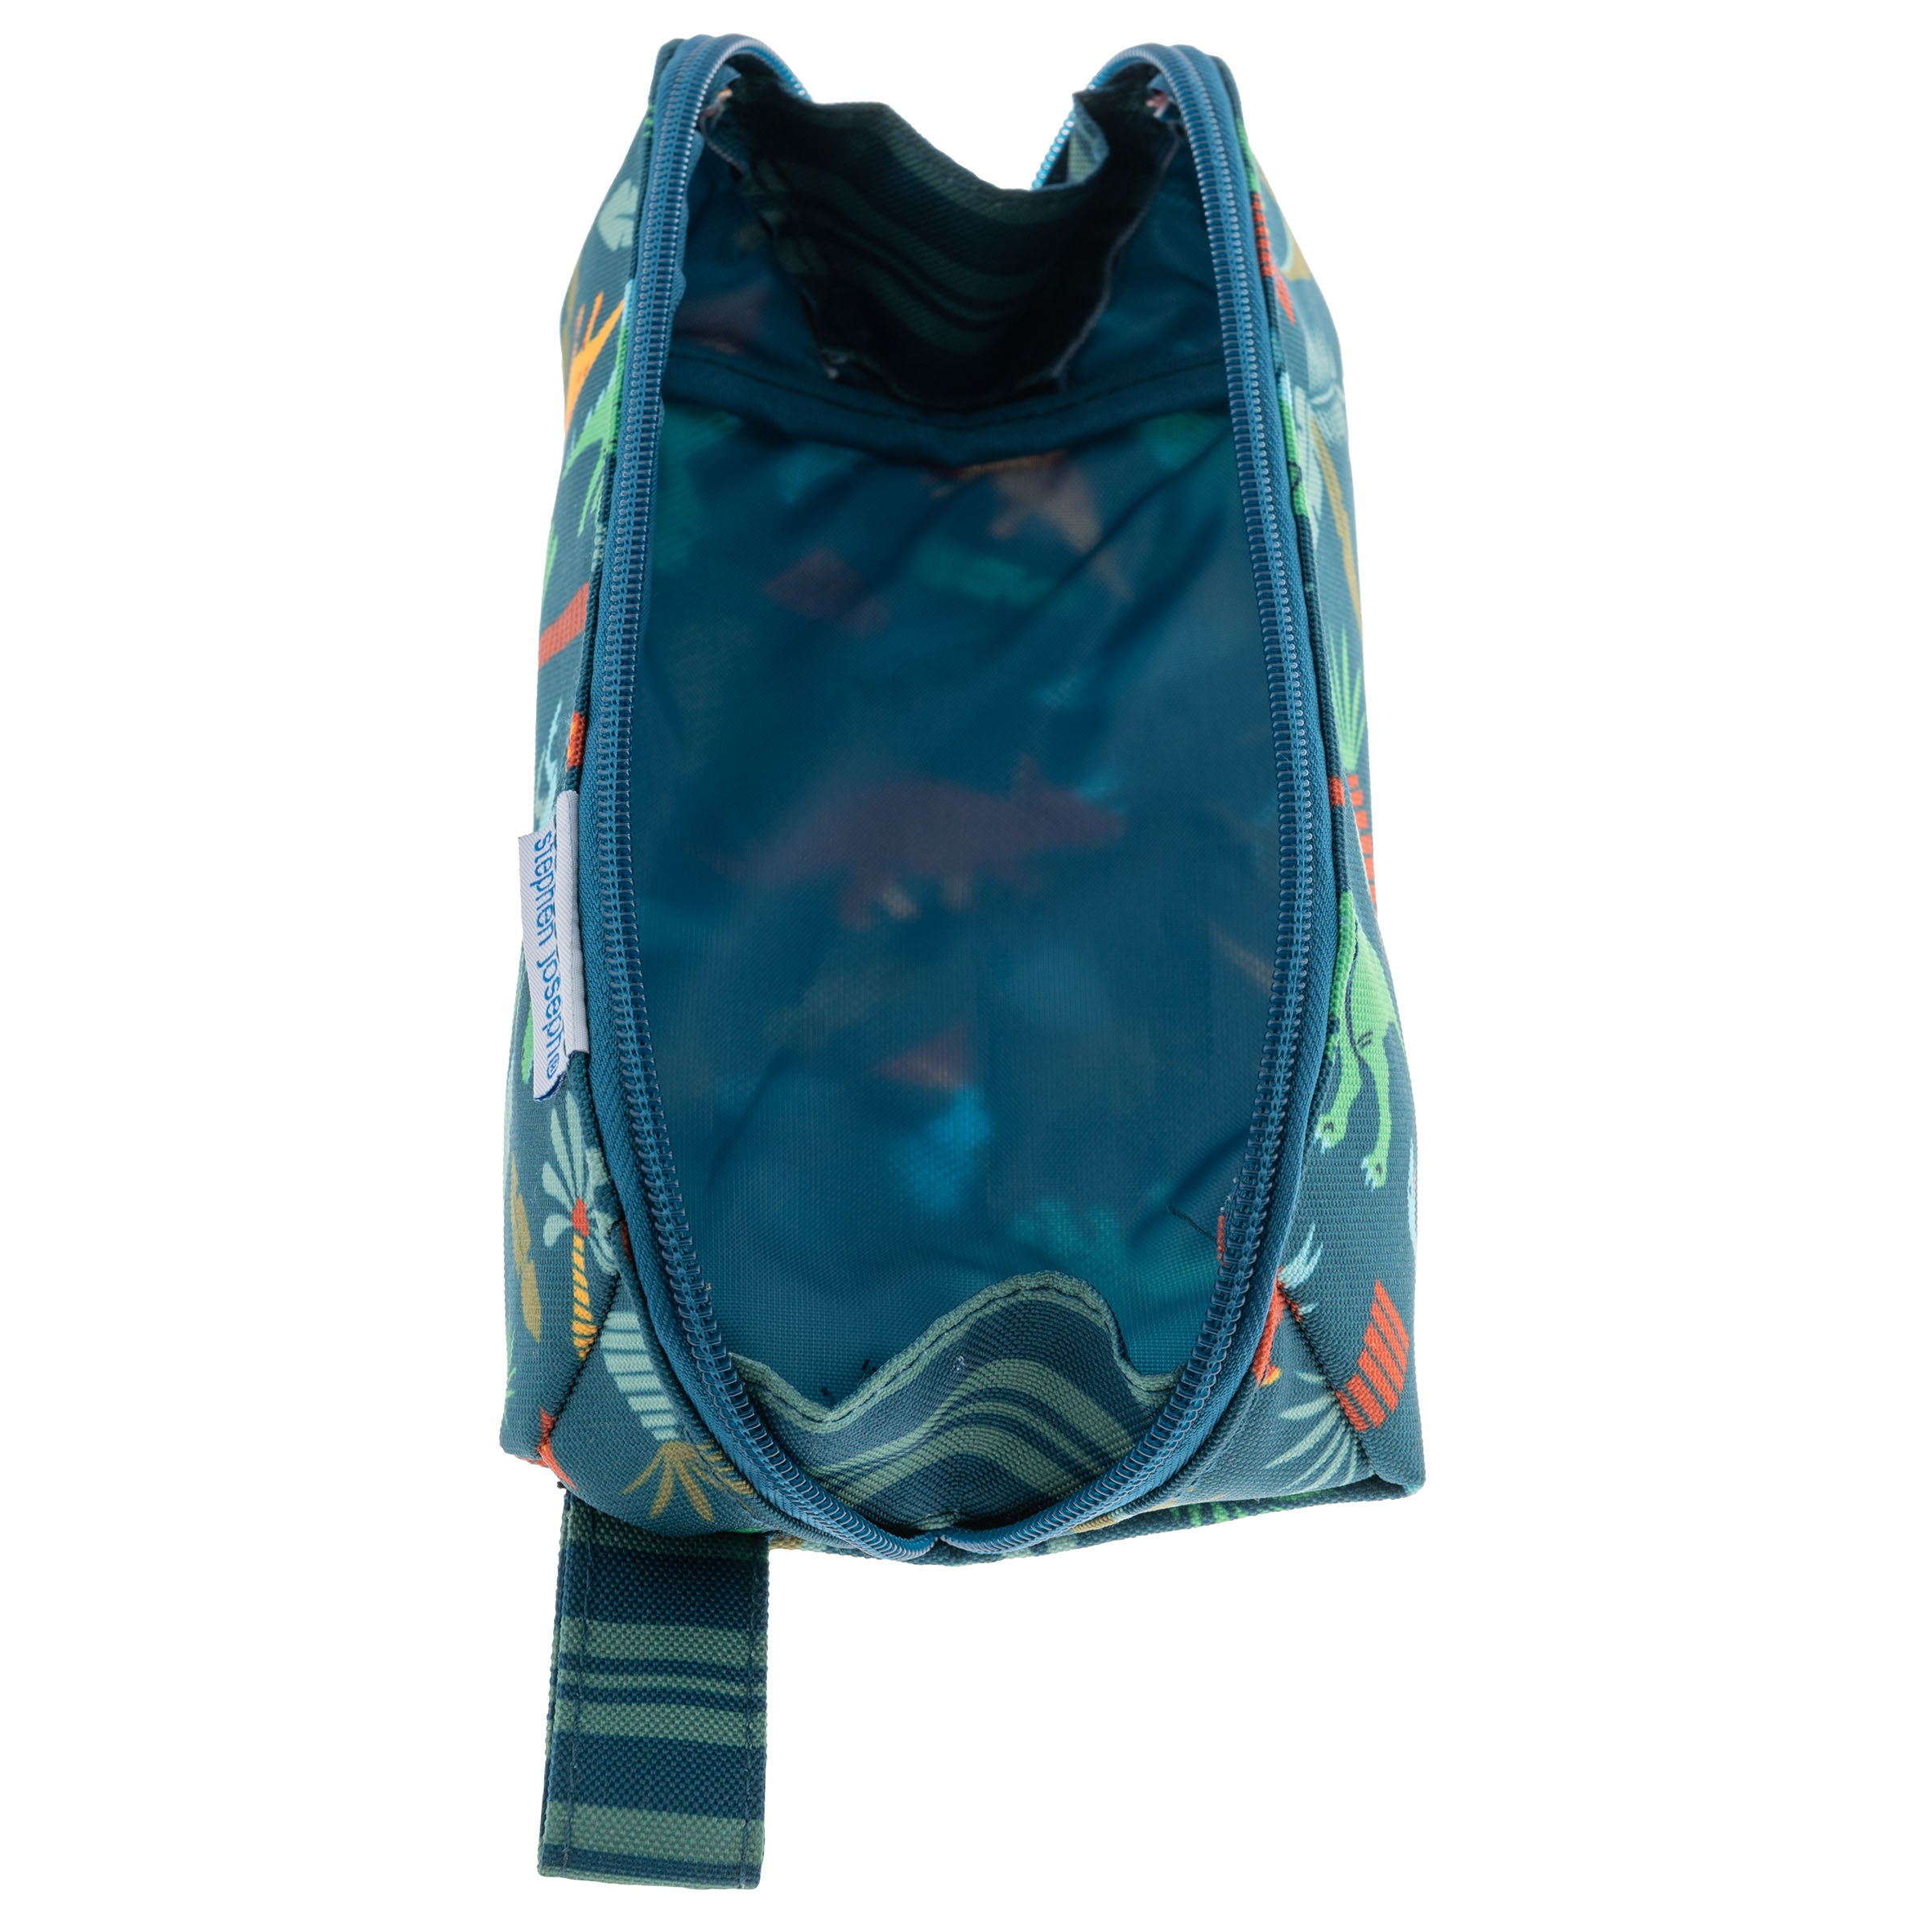 All Over Print Pencil Pouch Dino